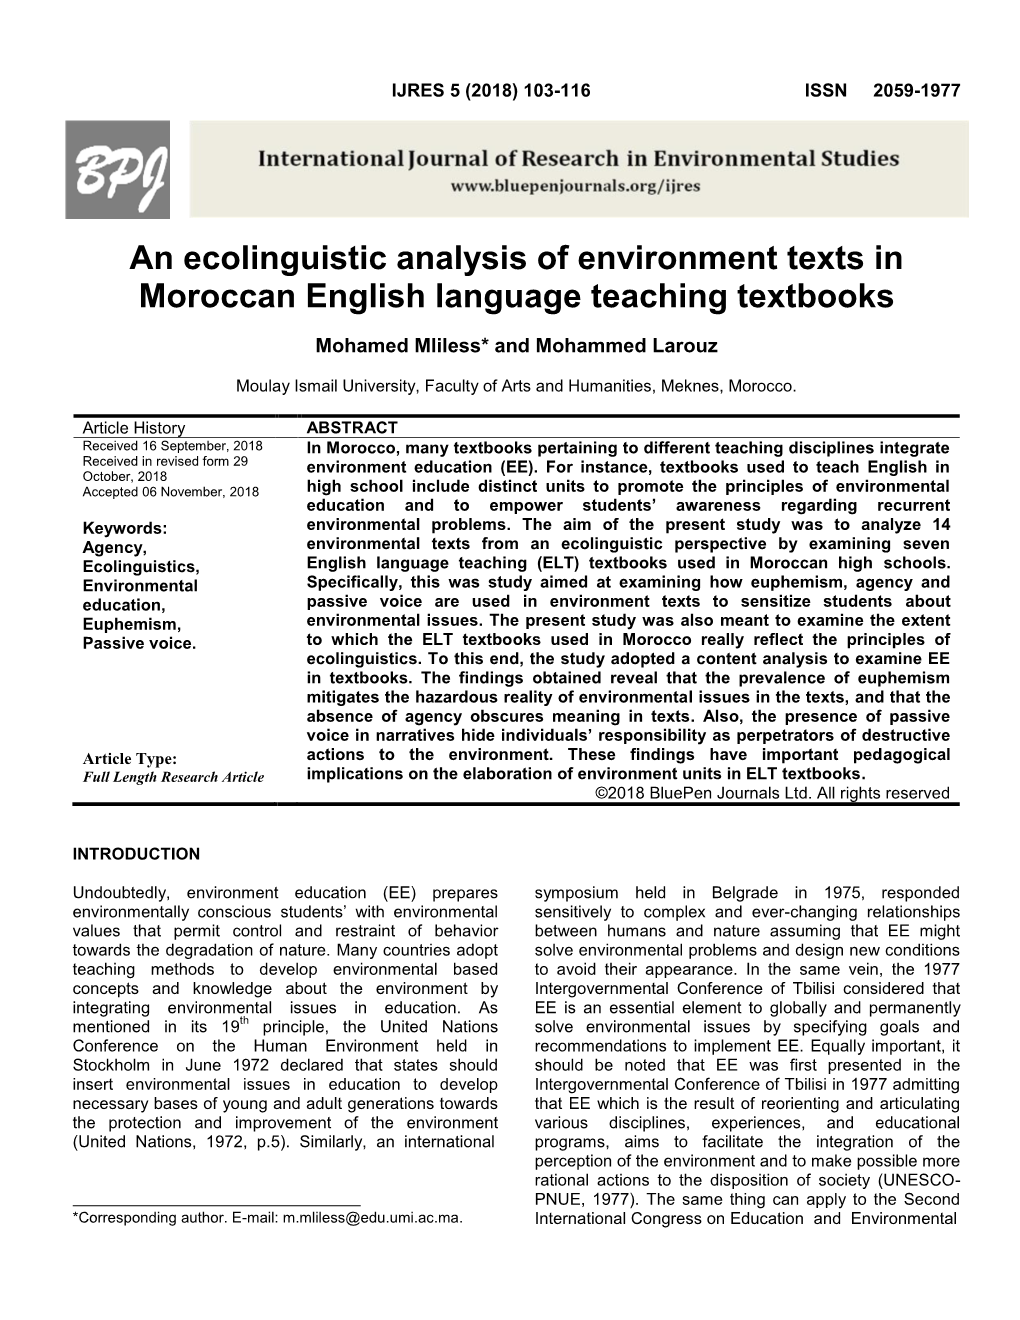 An Ecolinguistic Analysis of Environment Texts in Moroccan English Language Teaching Textbooks